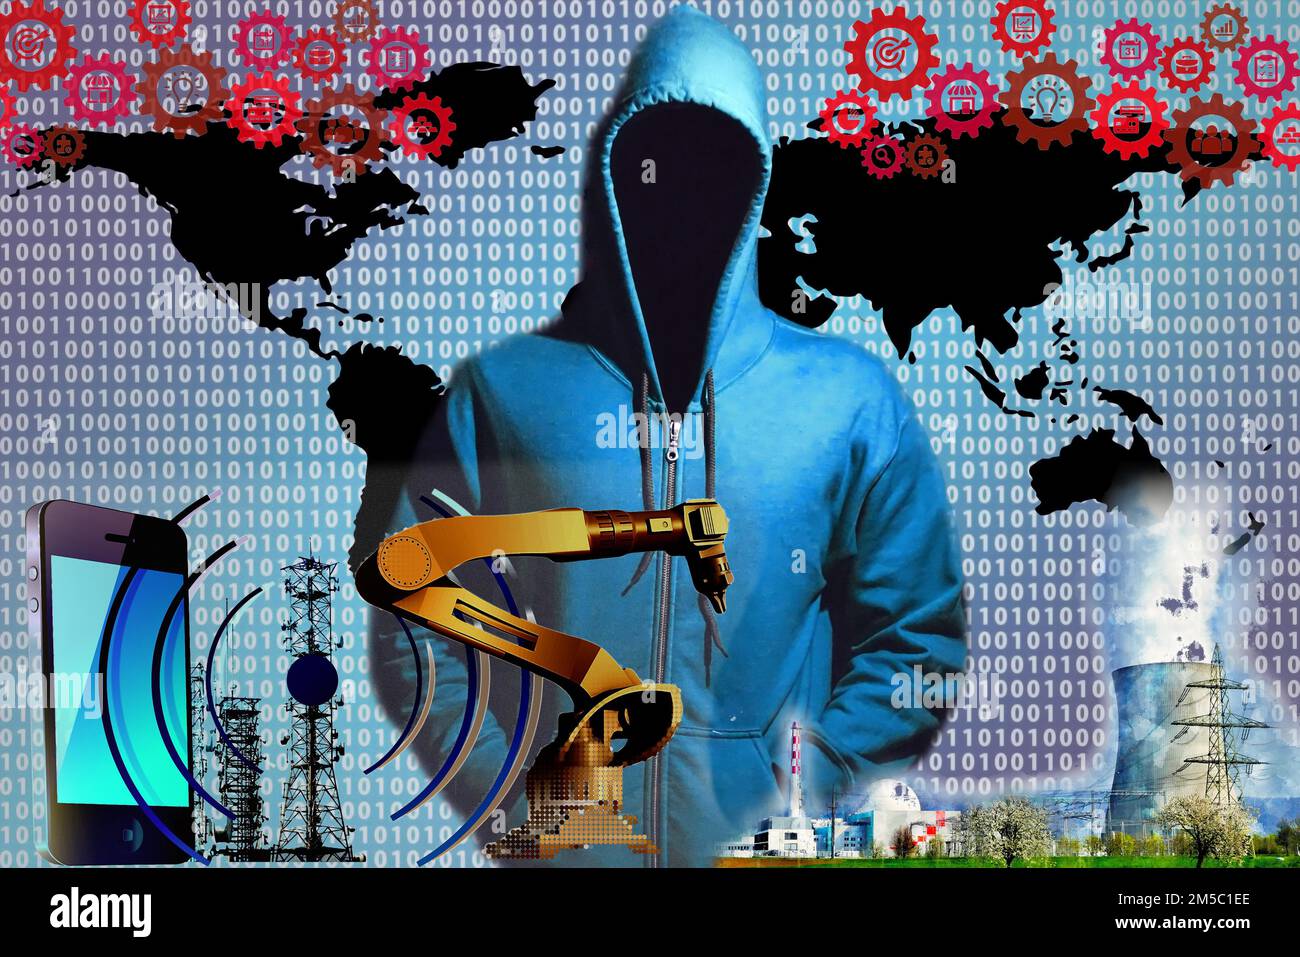 Symbolic image, cyber security, cyber attacks worldwide, computer crime, digital IT attacks, economy, energy economy, nuclear power plants, society Stock Photo